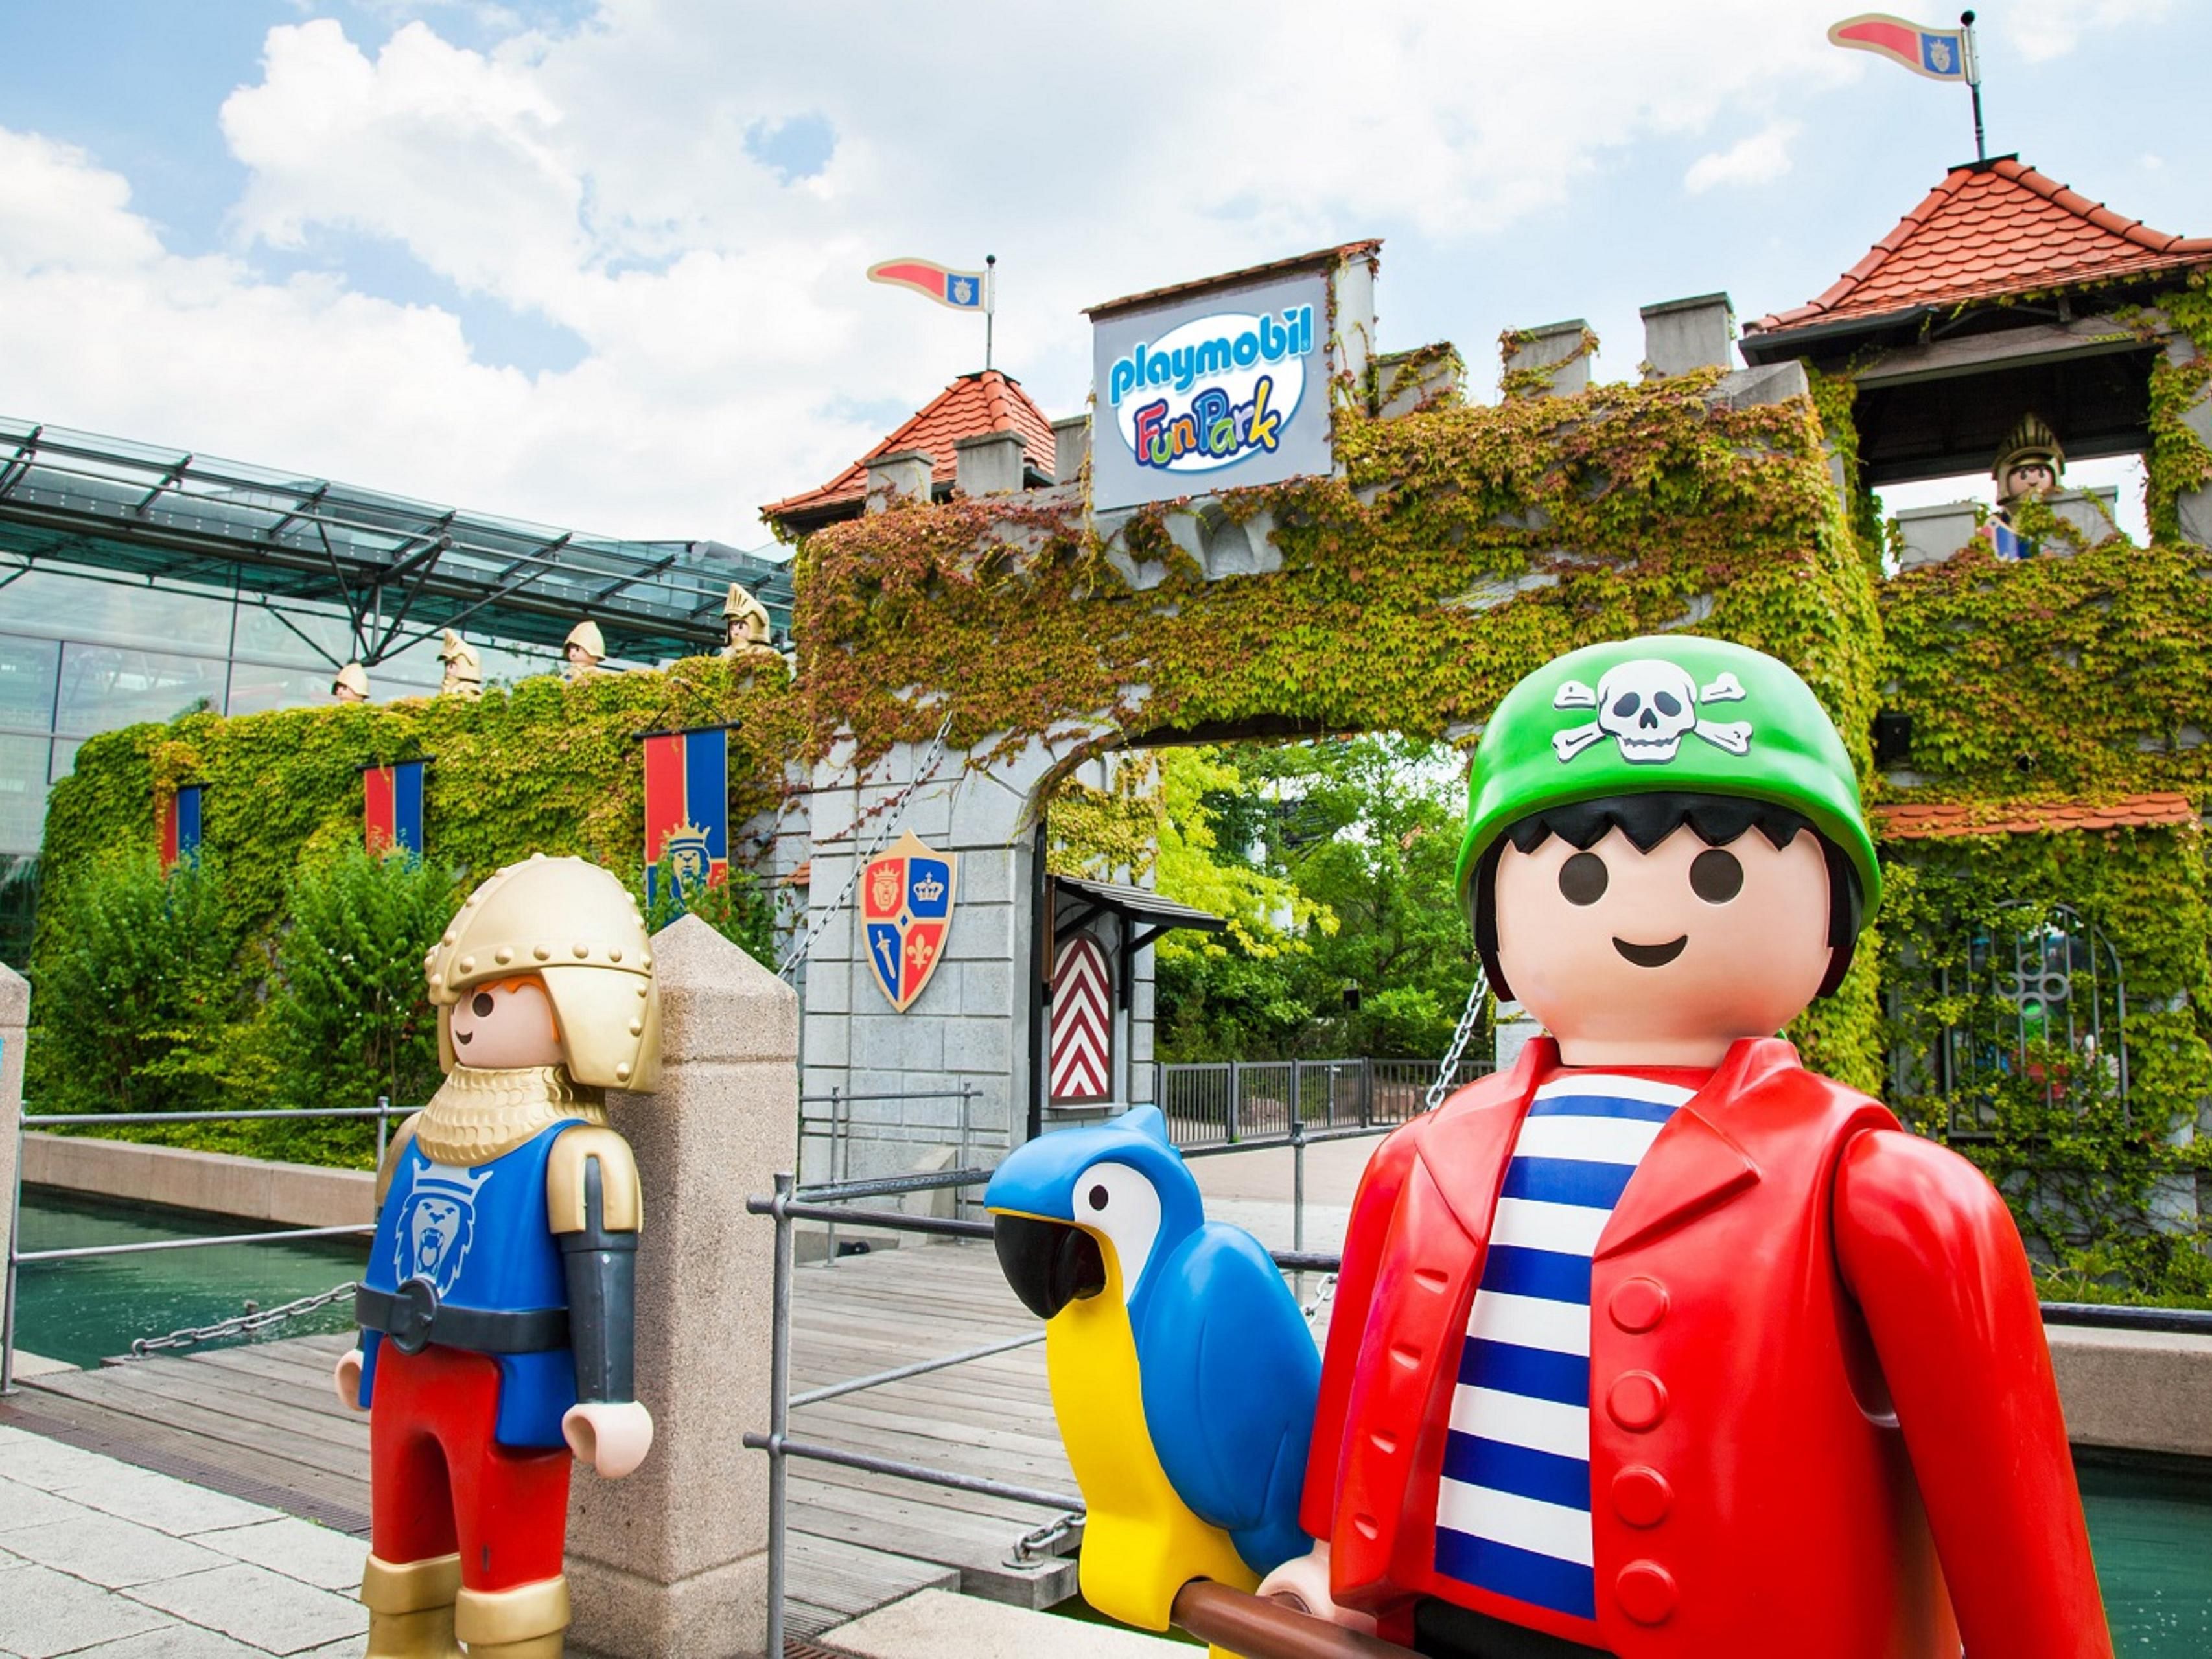 Enjoy a day in the PLAYMOBIL-FunPark with your family. It is located a 23 minute drive by car from our hotel.